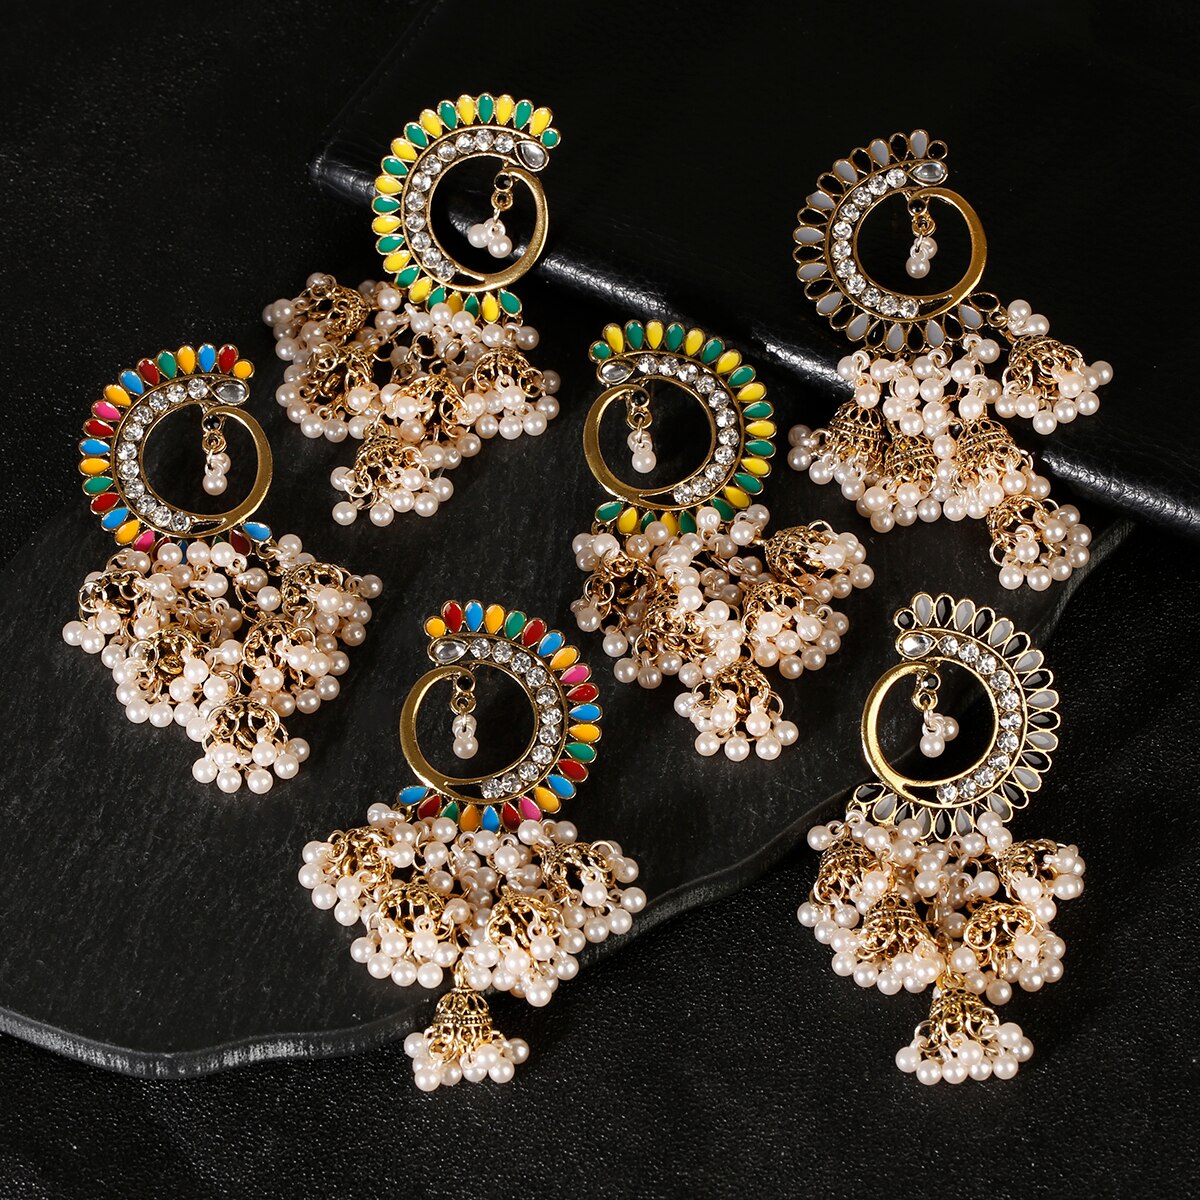 Afghan-Indian-Jewelry-Jhumka-Earrings-For-Women-Gypsy-Gold-Color-Dripping-Oil-Flower-Earrings-Fashio-1005003803870351-2